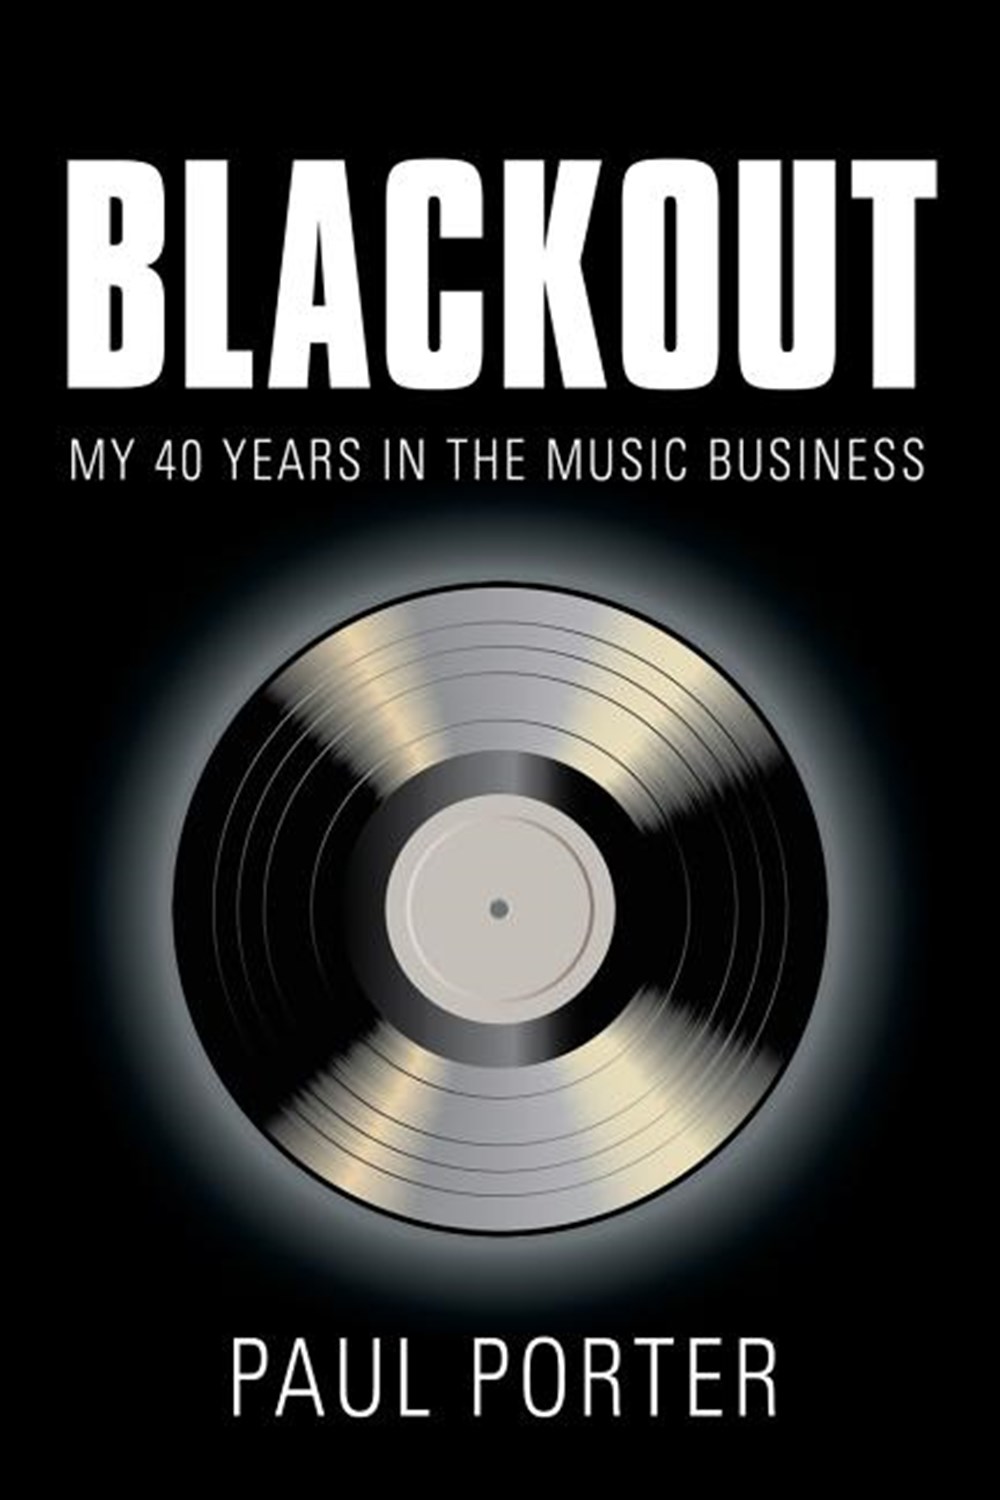 Blackout My 40 Years in the Music Business